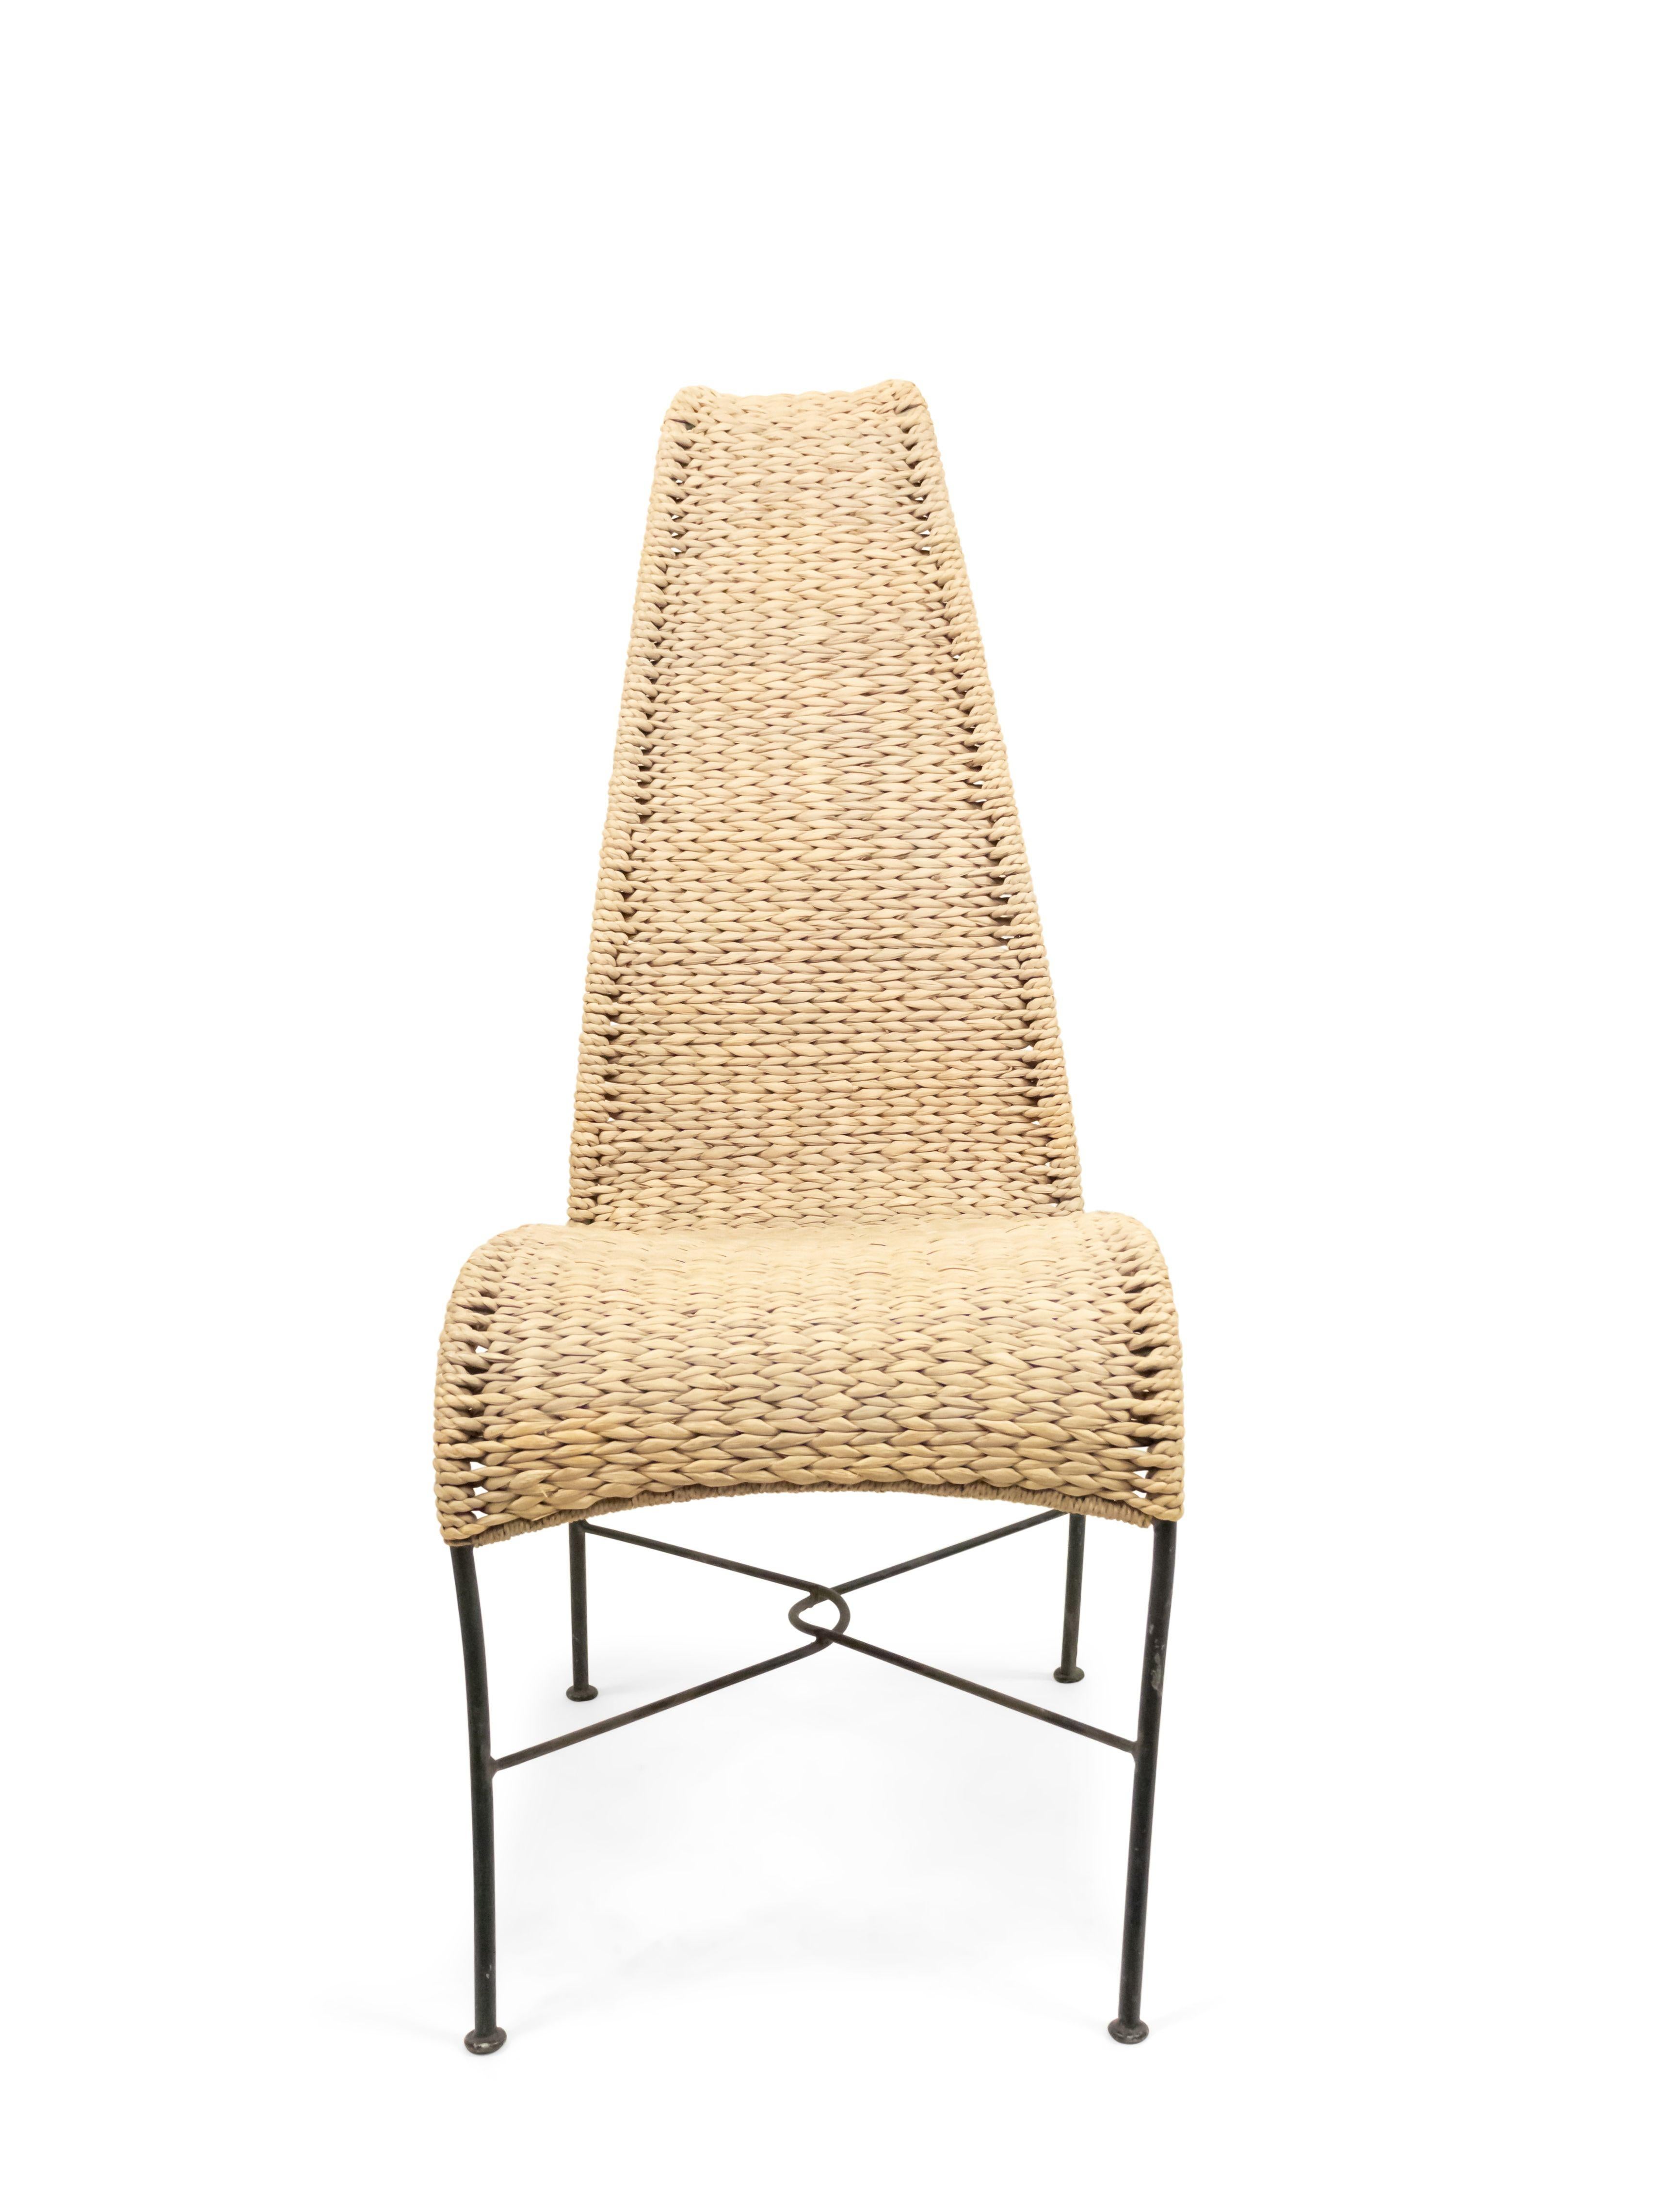 American Post-War Rattan Side Chair For Sale 8